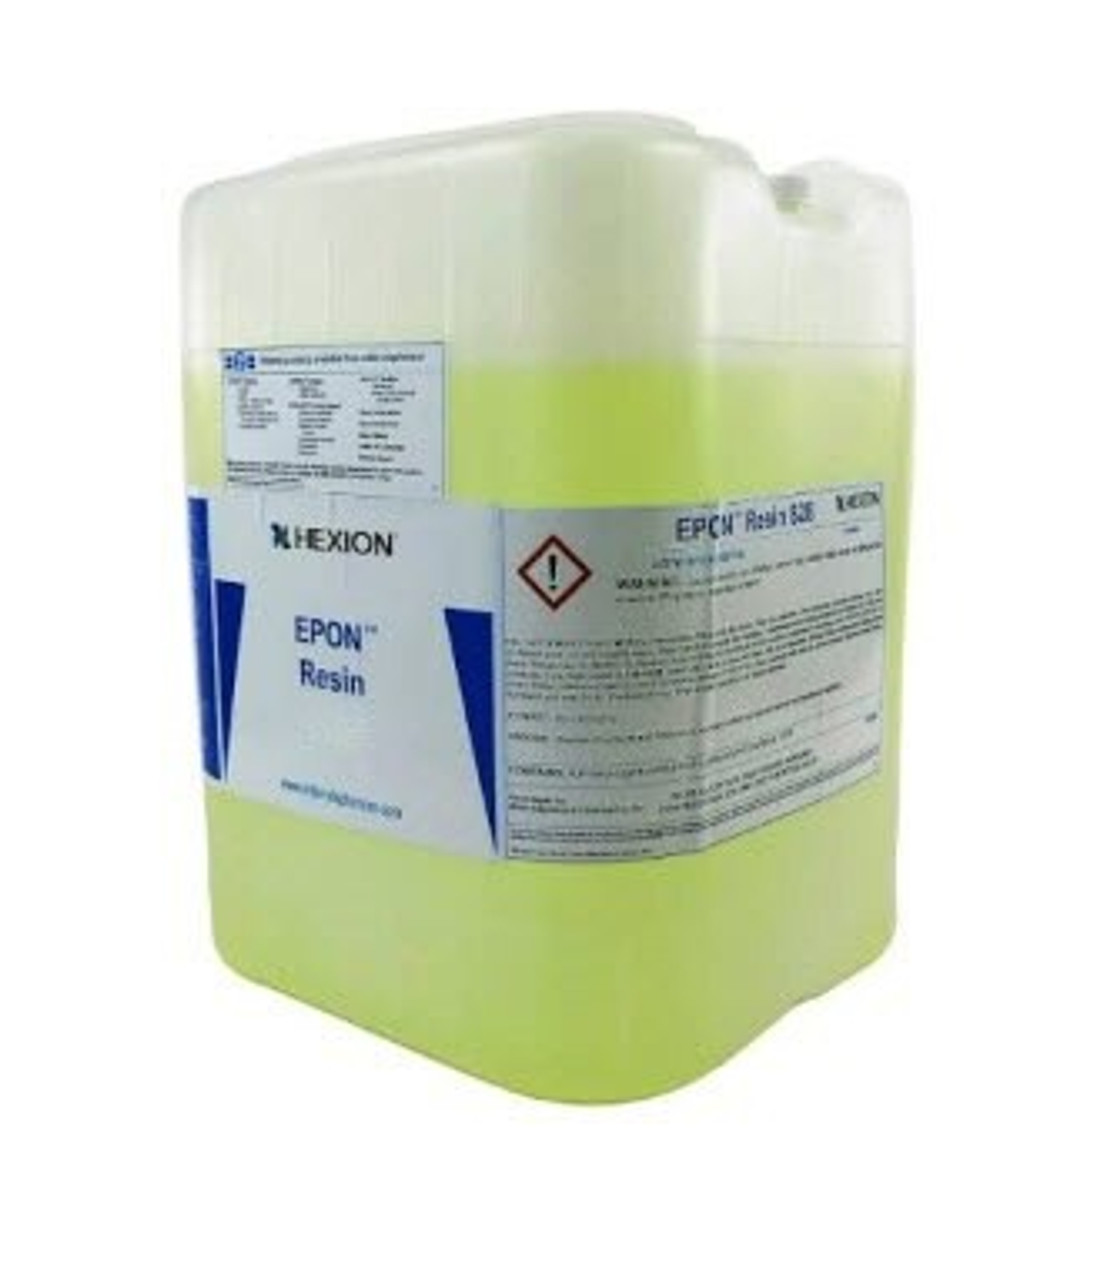 Hexion EPON 825 Clear Epoxy Resin - 5 Gallon Pail at